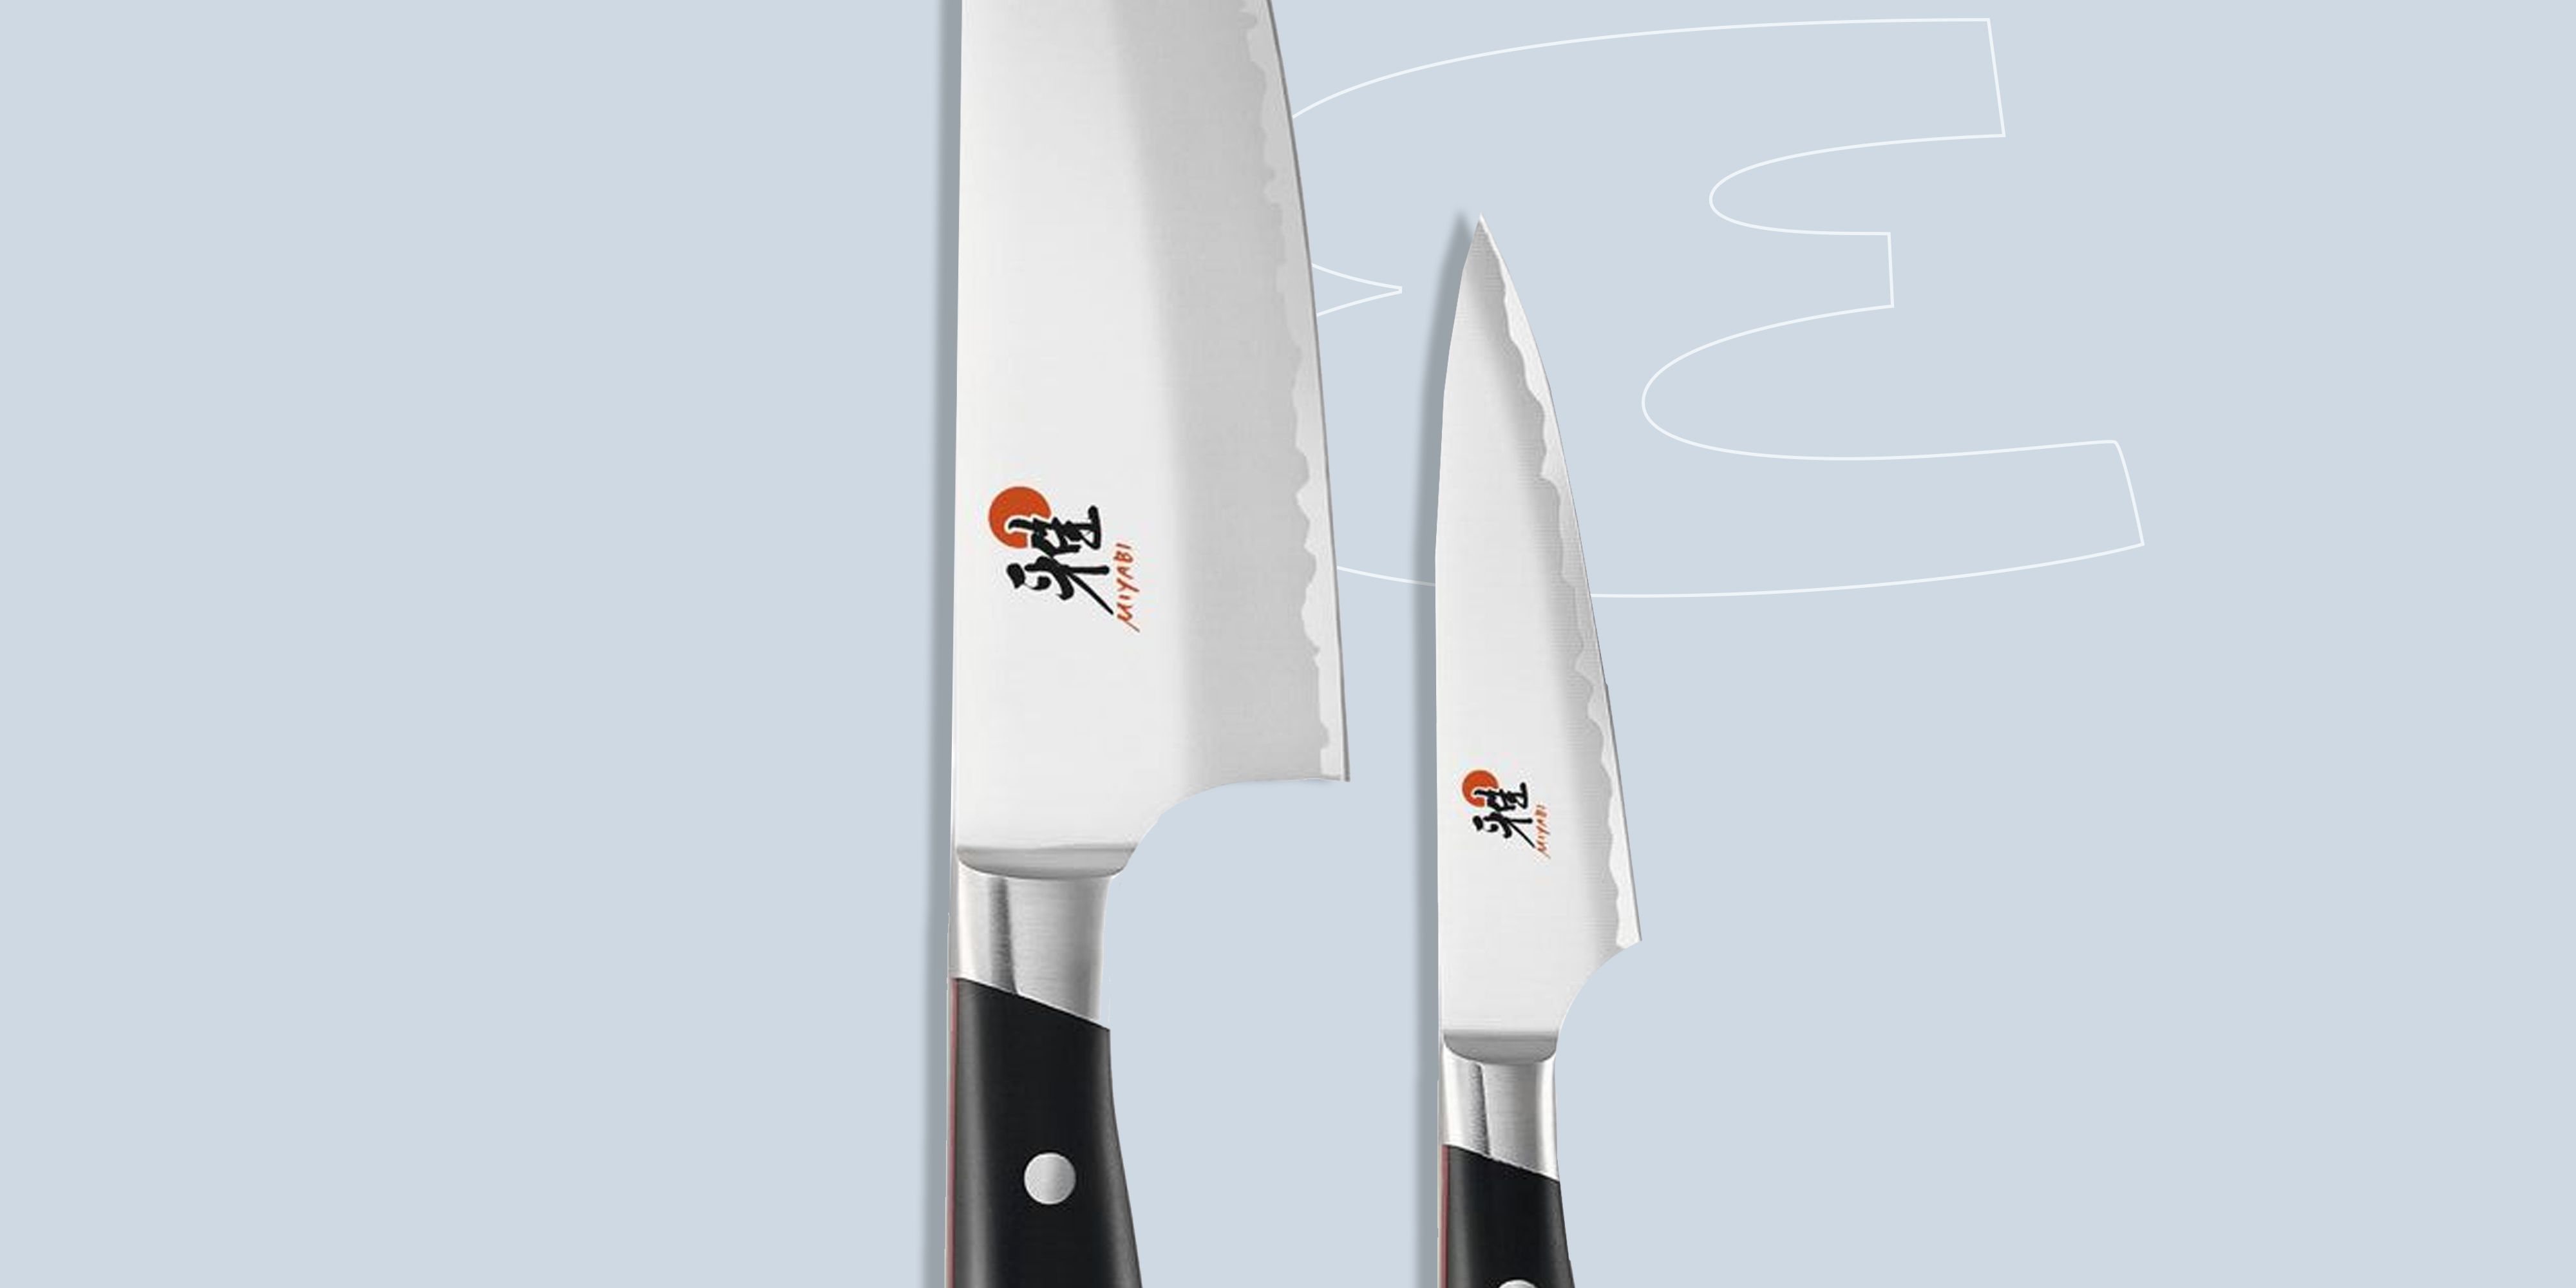 Western- and Japanese-Style Chef's Knives: What's the Difference?